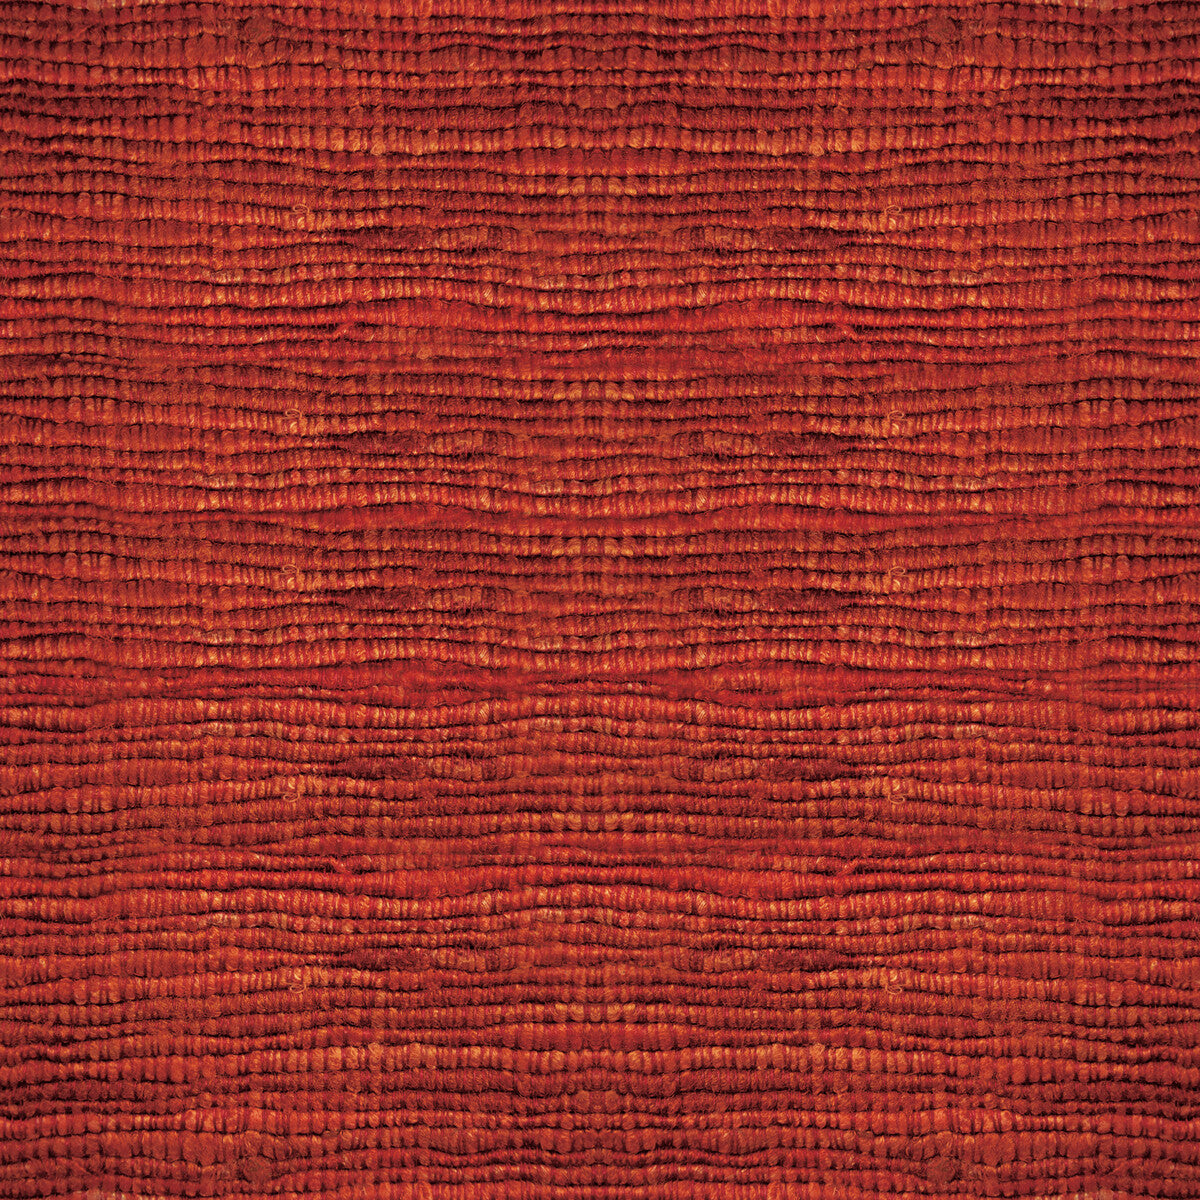 Ami fabric in naranja color - pattern GDT5640.004.0 - by Gaston y Daniela in the Gaston Japon collection